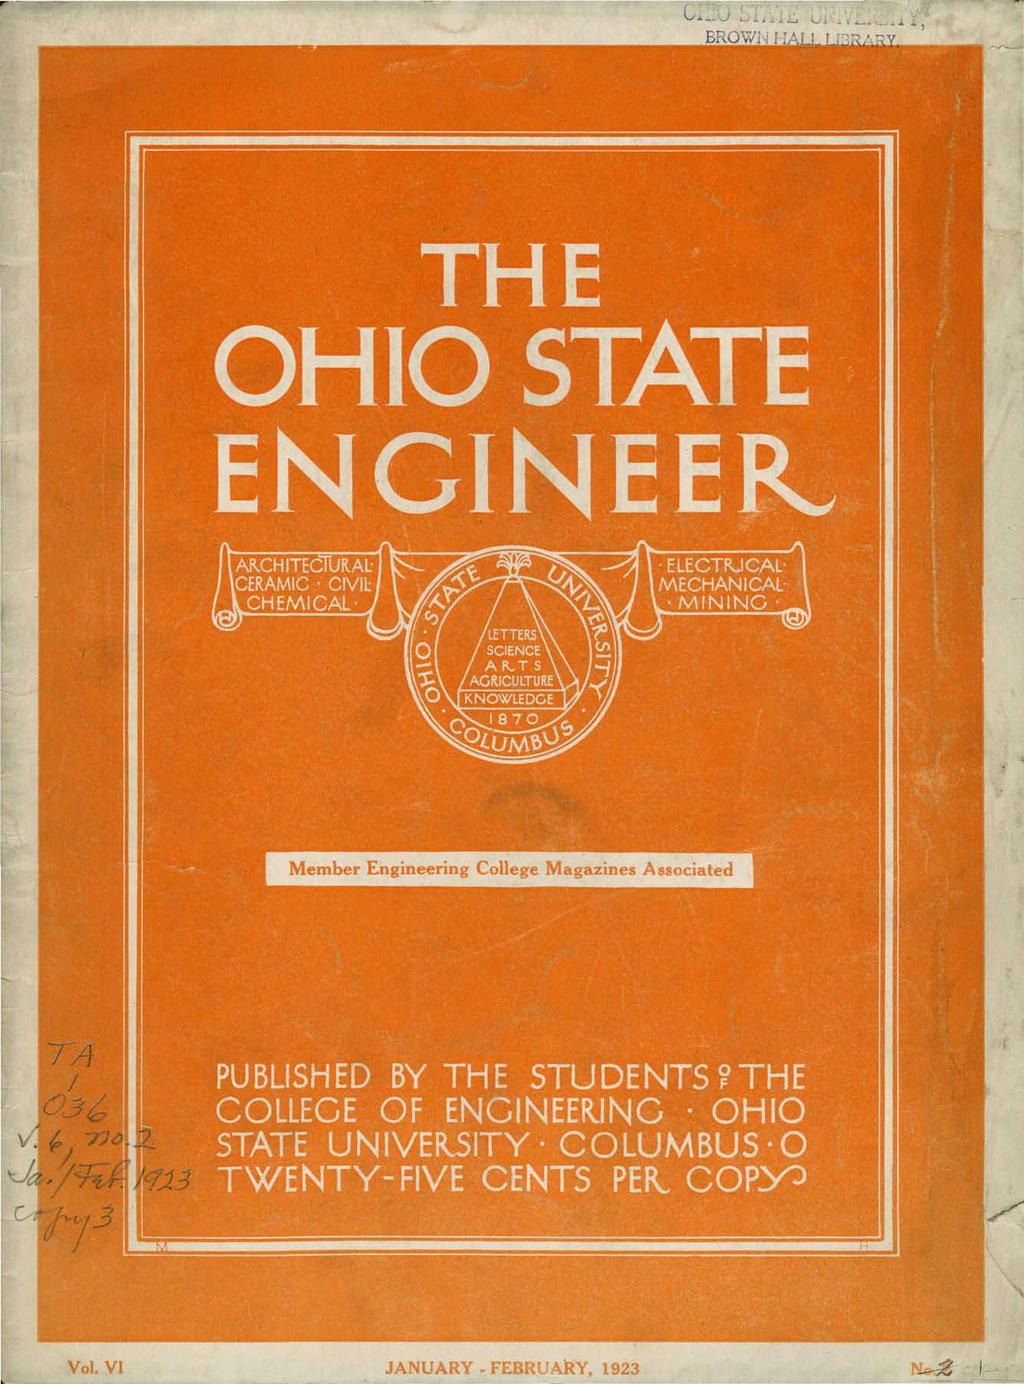 THE OHIO STATE ENGINEER ARCHITECTURAL CERAMIC CIVIL CHEMICAL ELECTRICAL MECHANICAL- -MINING /LETTERS\\ / SCIENCE V / ART S \ /AGRICULTURE KNOWLEDGE Member Engineering College